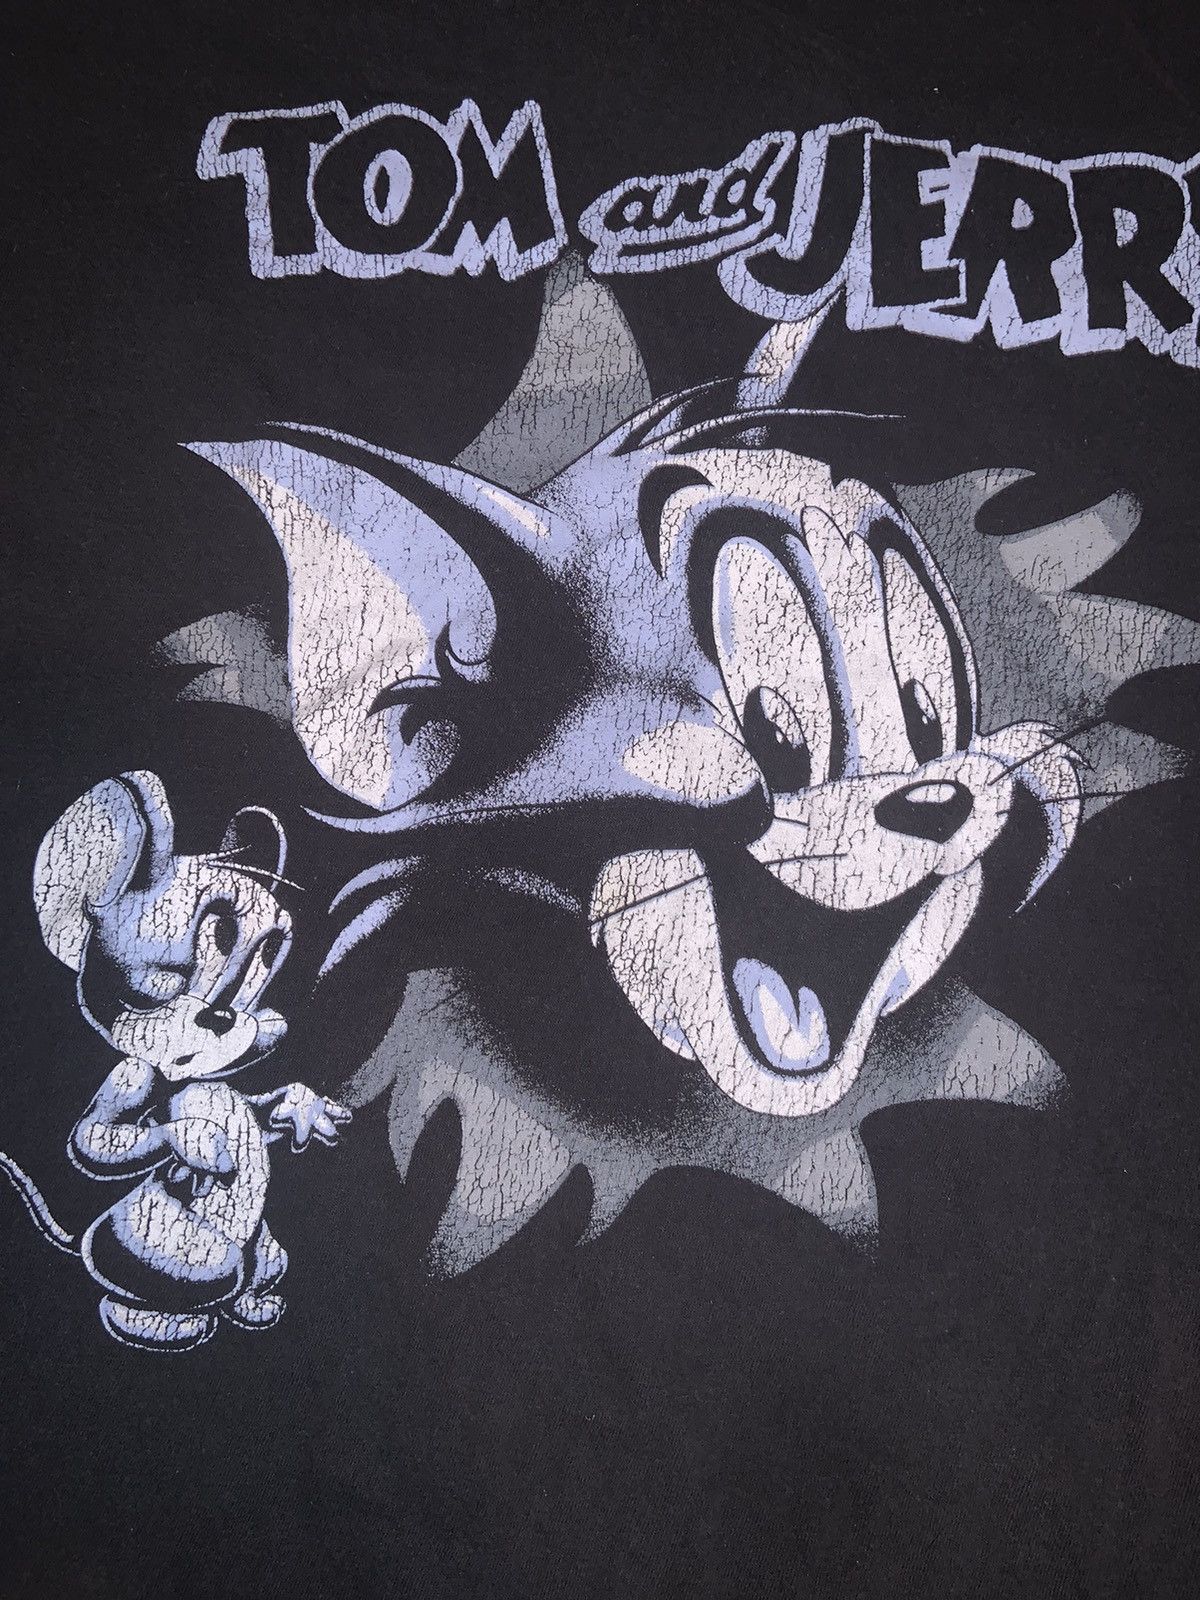 Vintage Distressed Vintage Tom and Jerry Shirt Size US M / EU 48-50 / 2 - 2 Preview